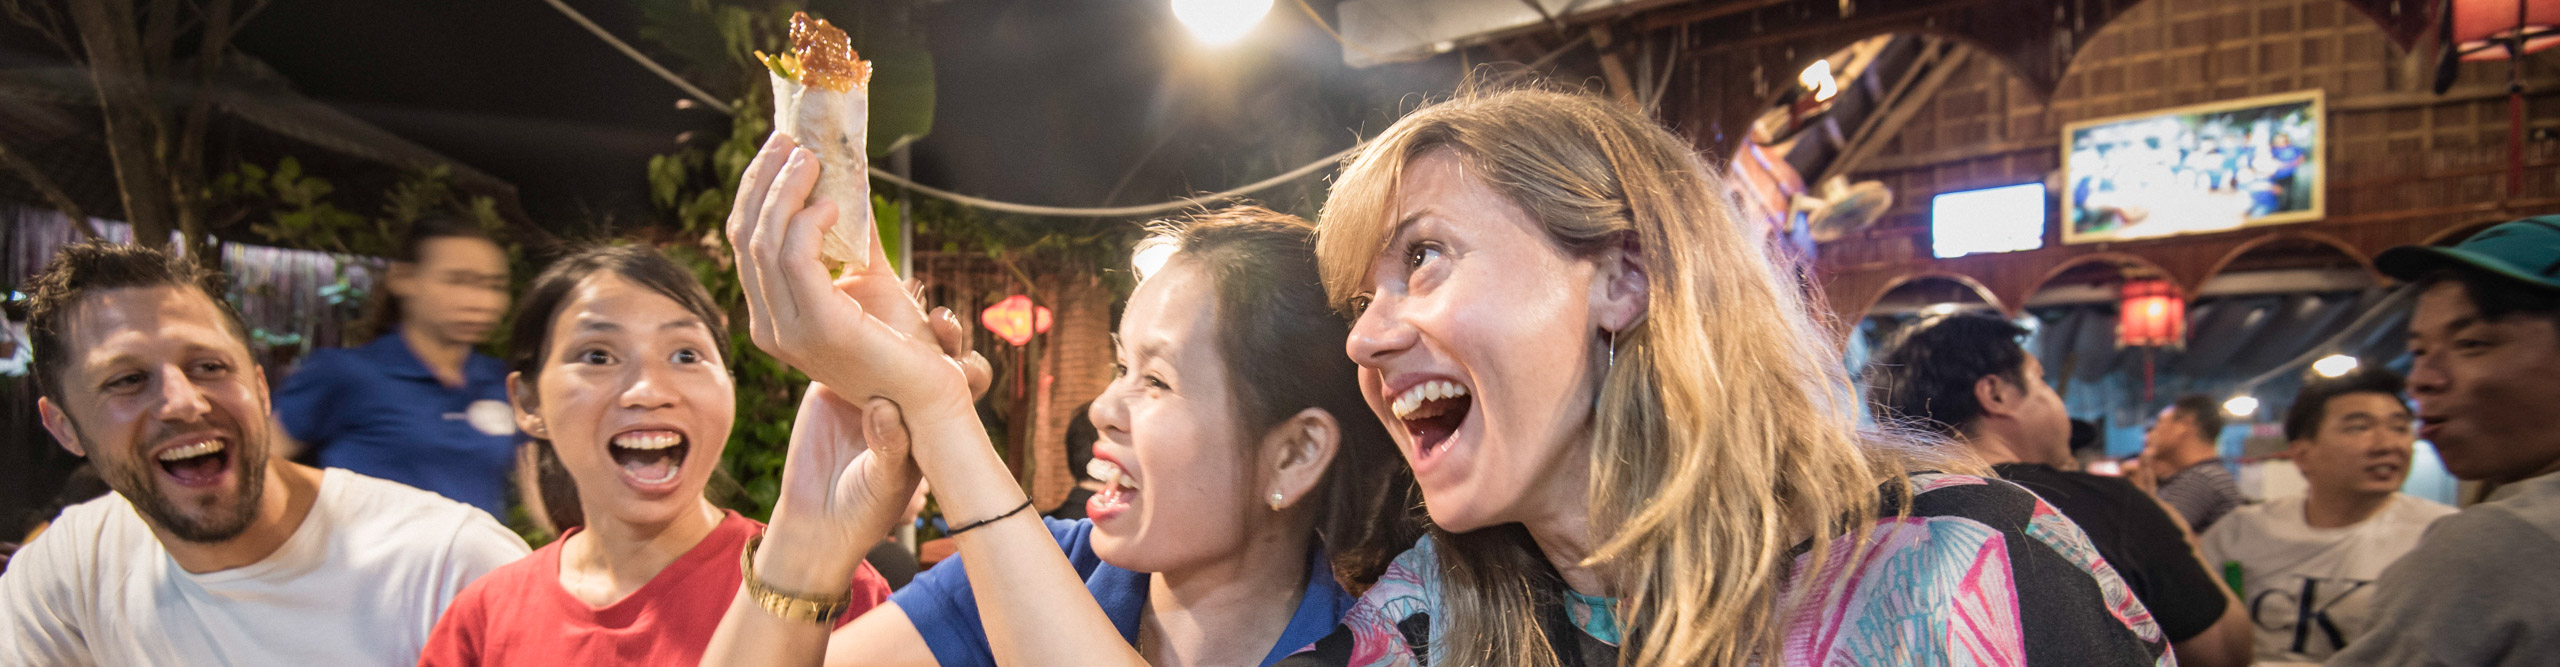 People drinking, having fun and smiling in Asia